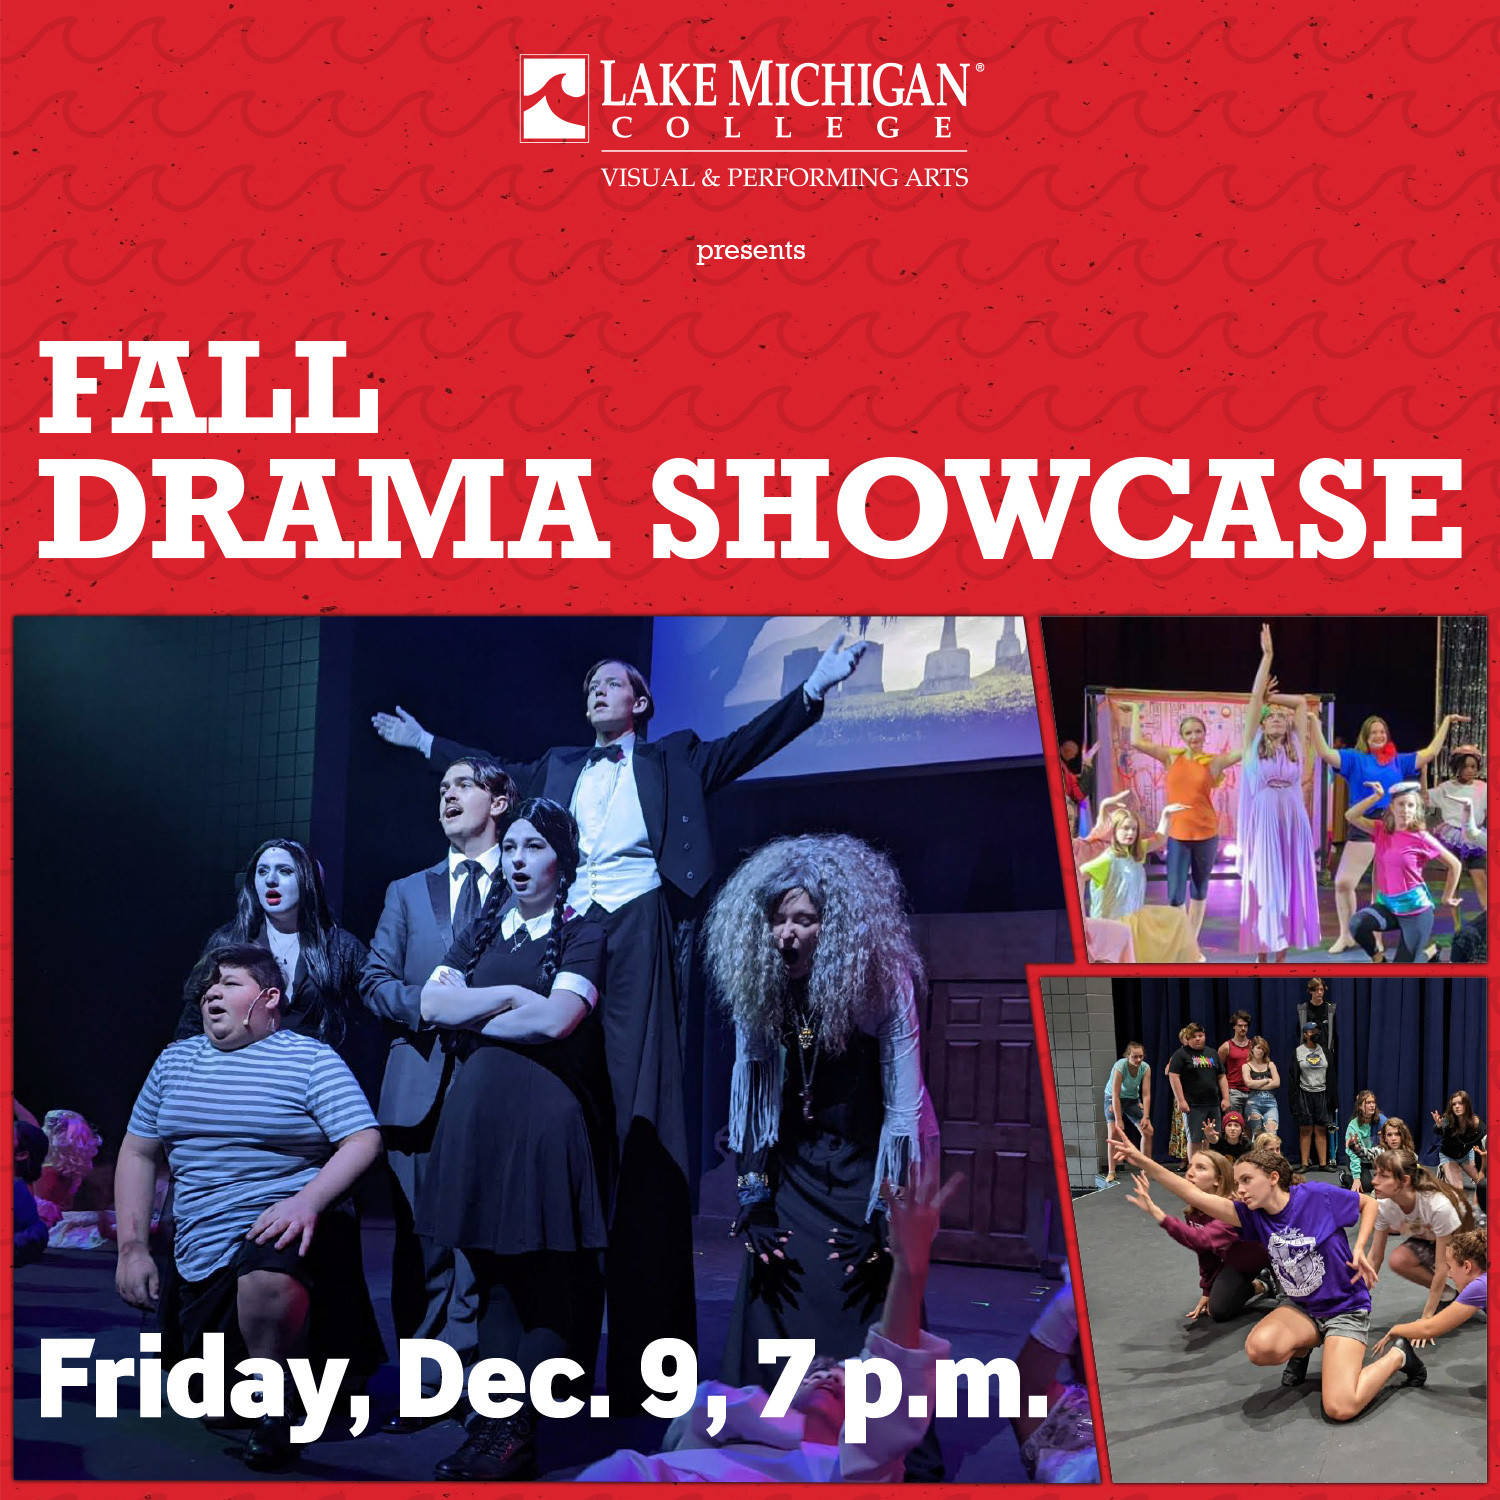 Visual & Performing Arts Department’s Drama Showcase slated for Dec. 9